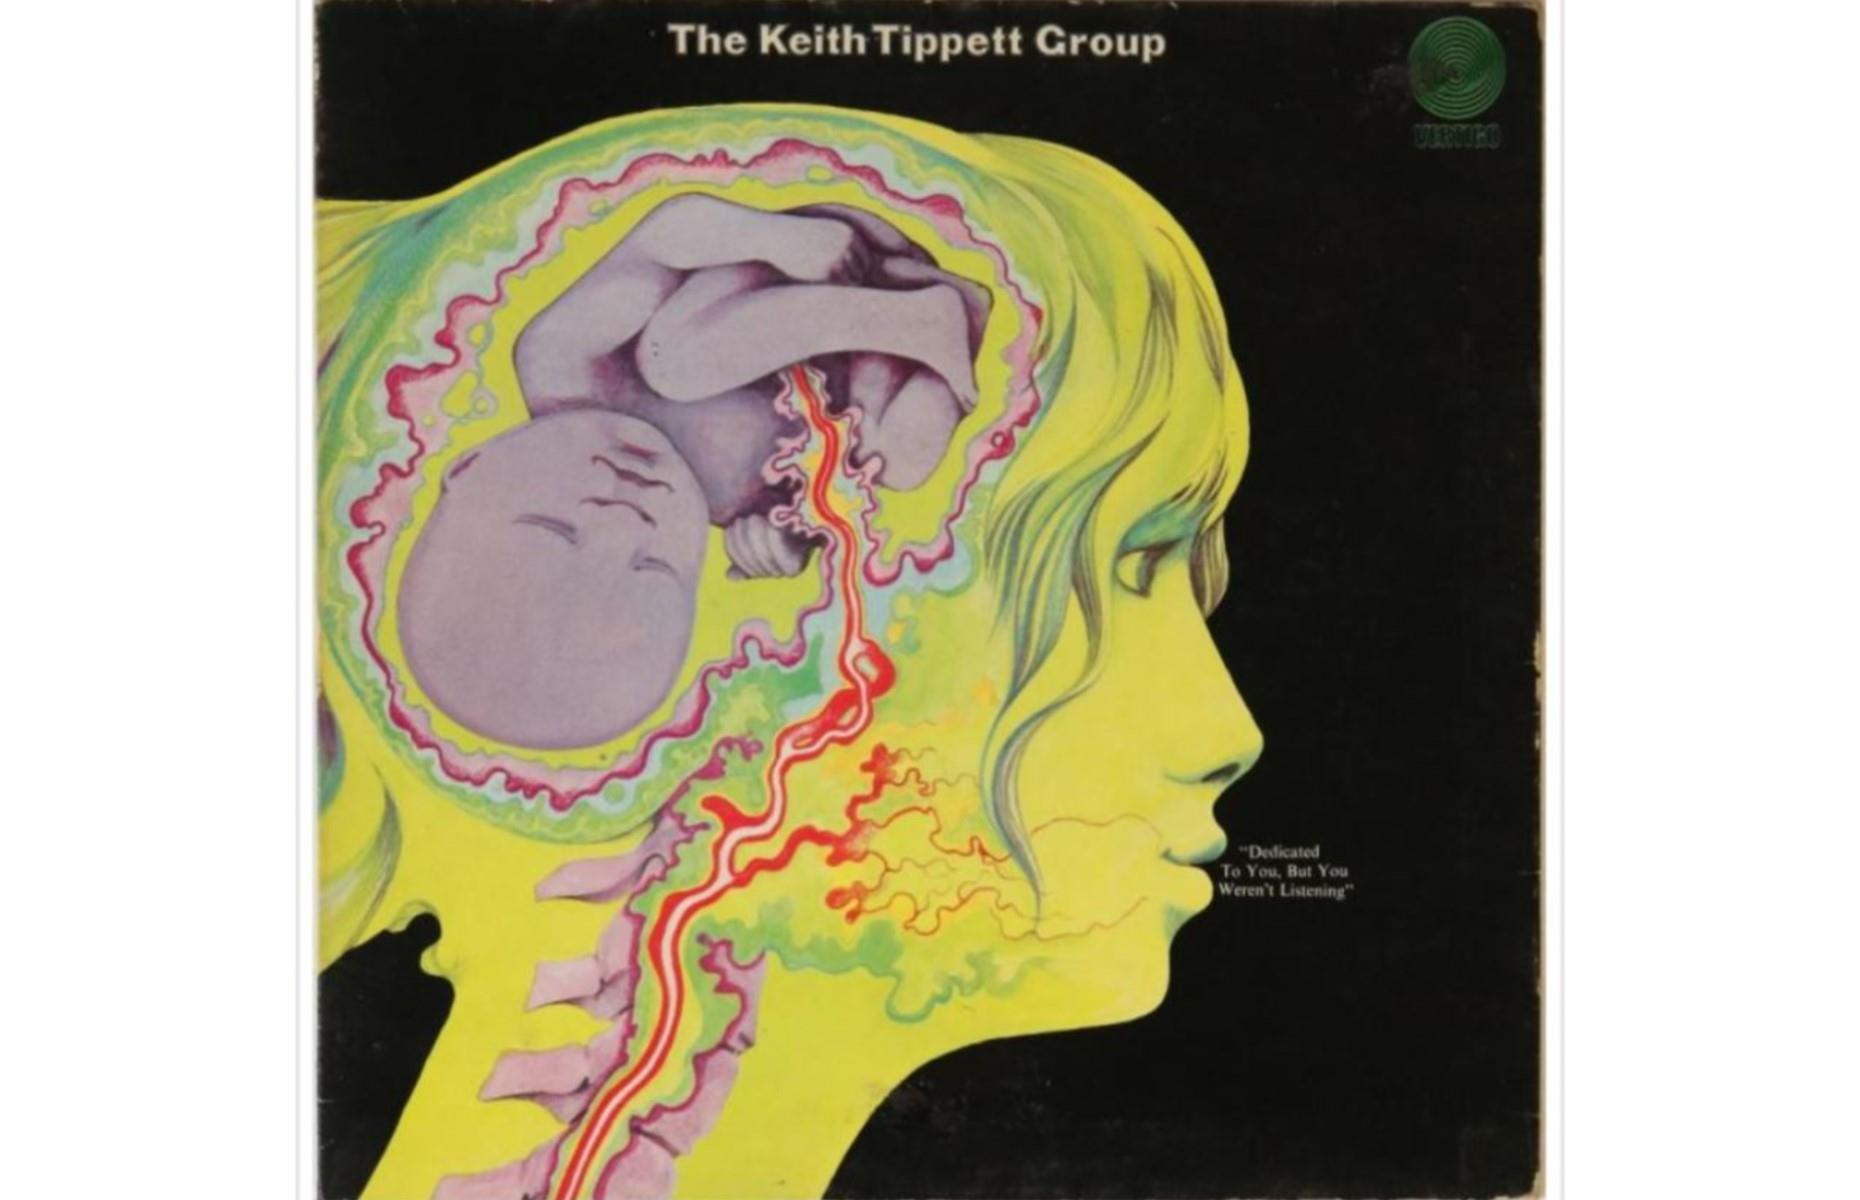 The Keith Tippett Group – Dedicated To You, But You Weren't Listening: up to £100